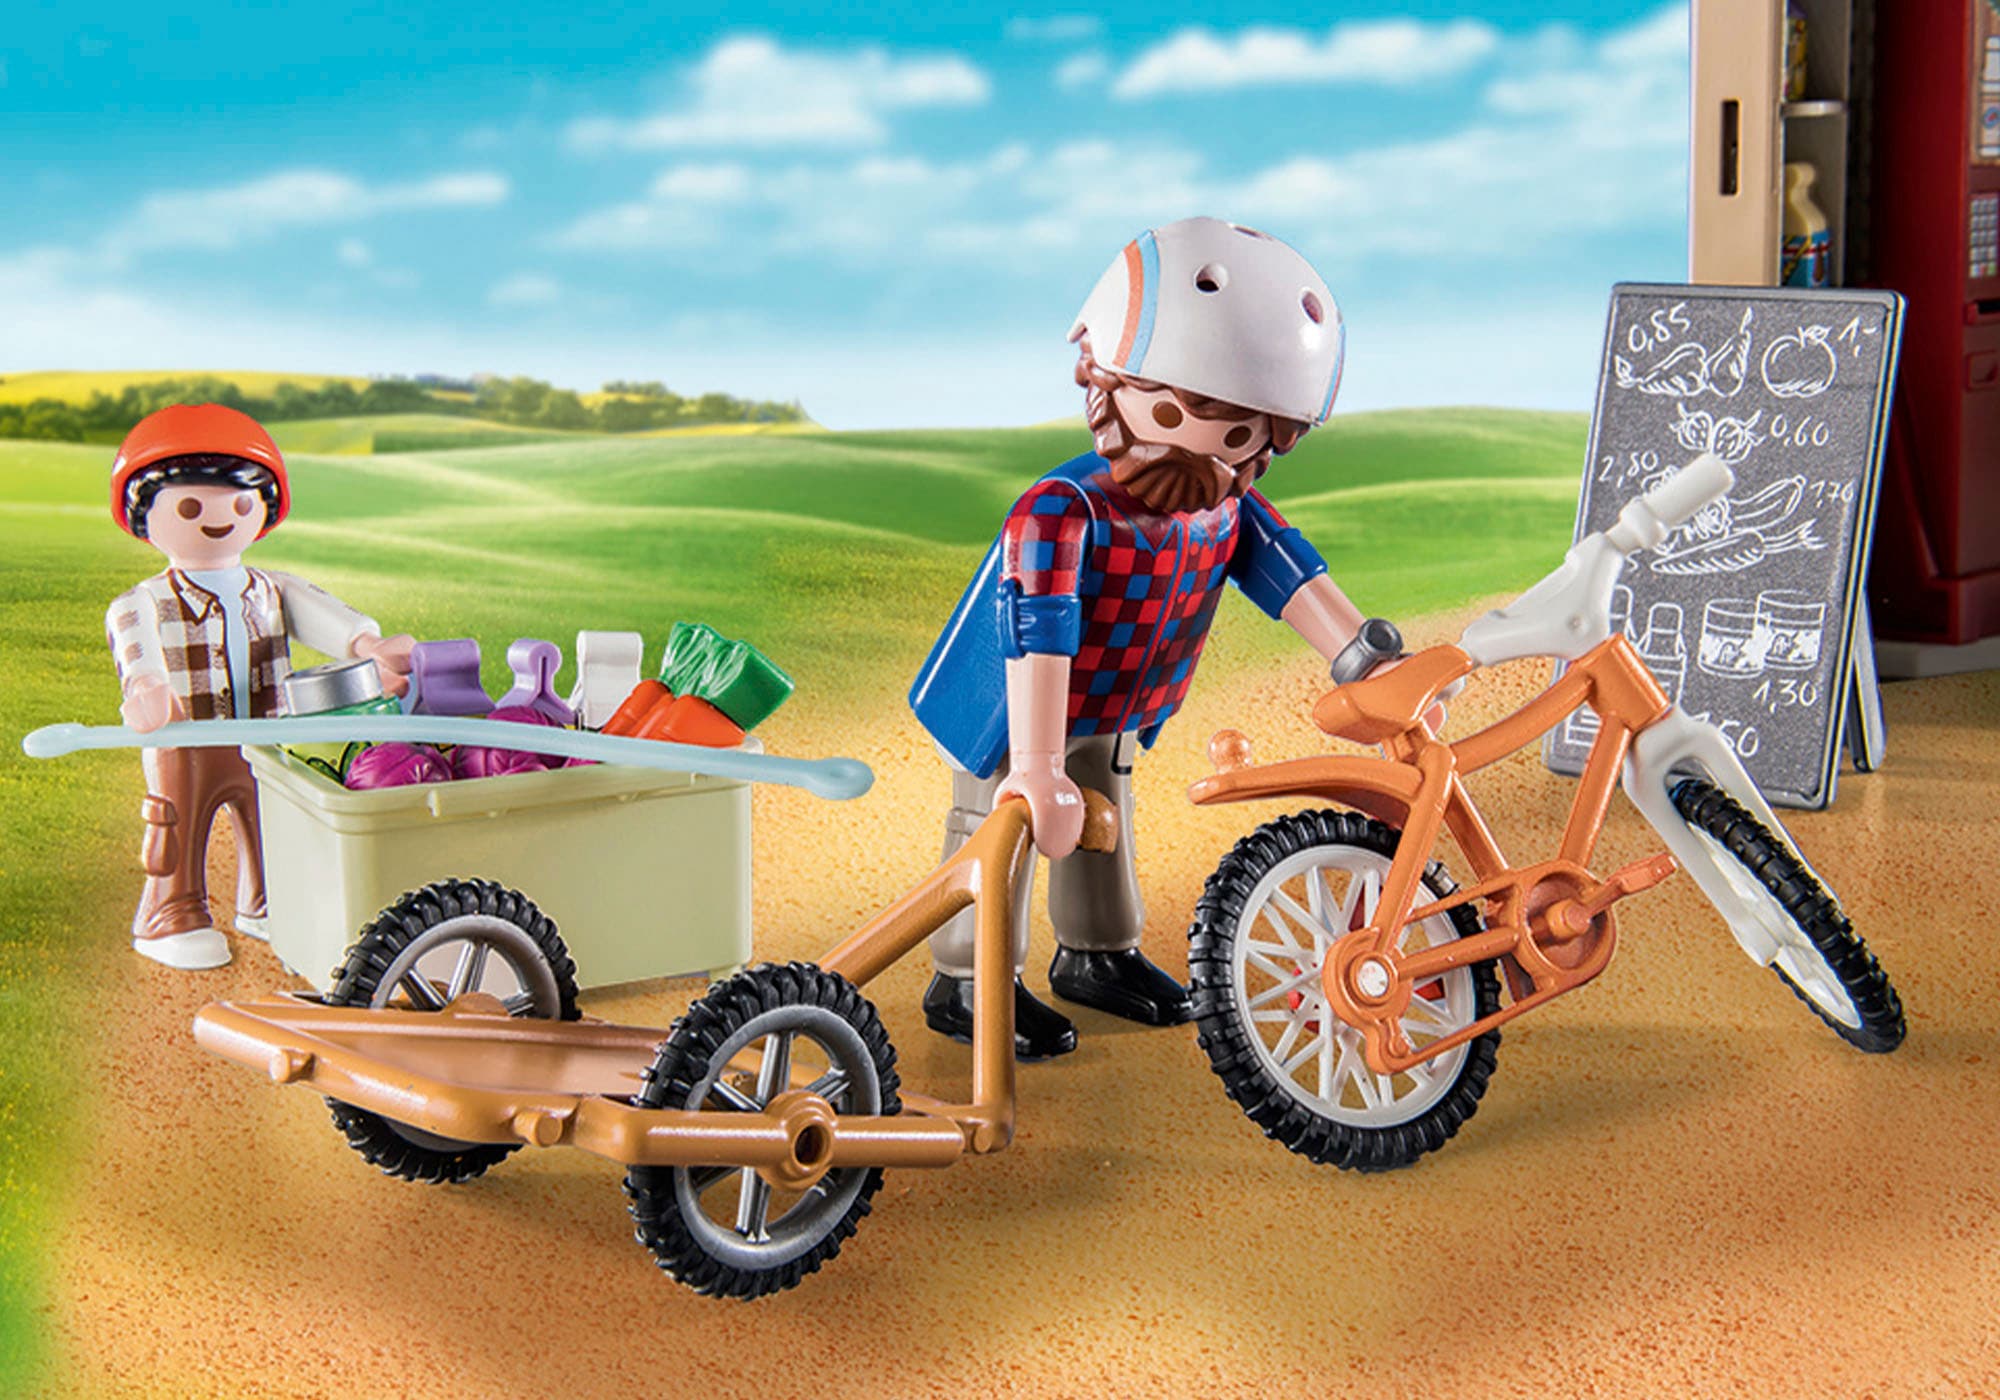 Playmobil® Konstruktions-Spielset »24-Stunden-Hofladen (71250), Country«, teilweise aus recyceltem Material; Made in Germany